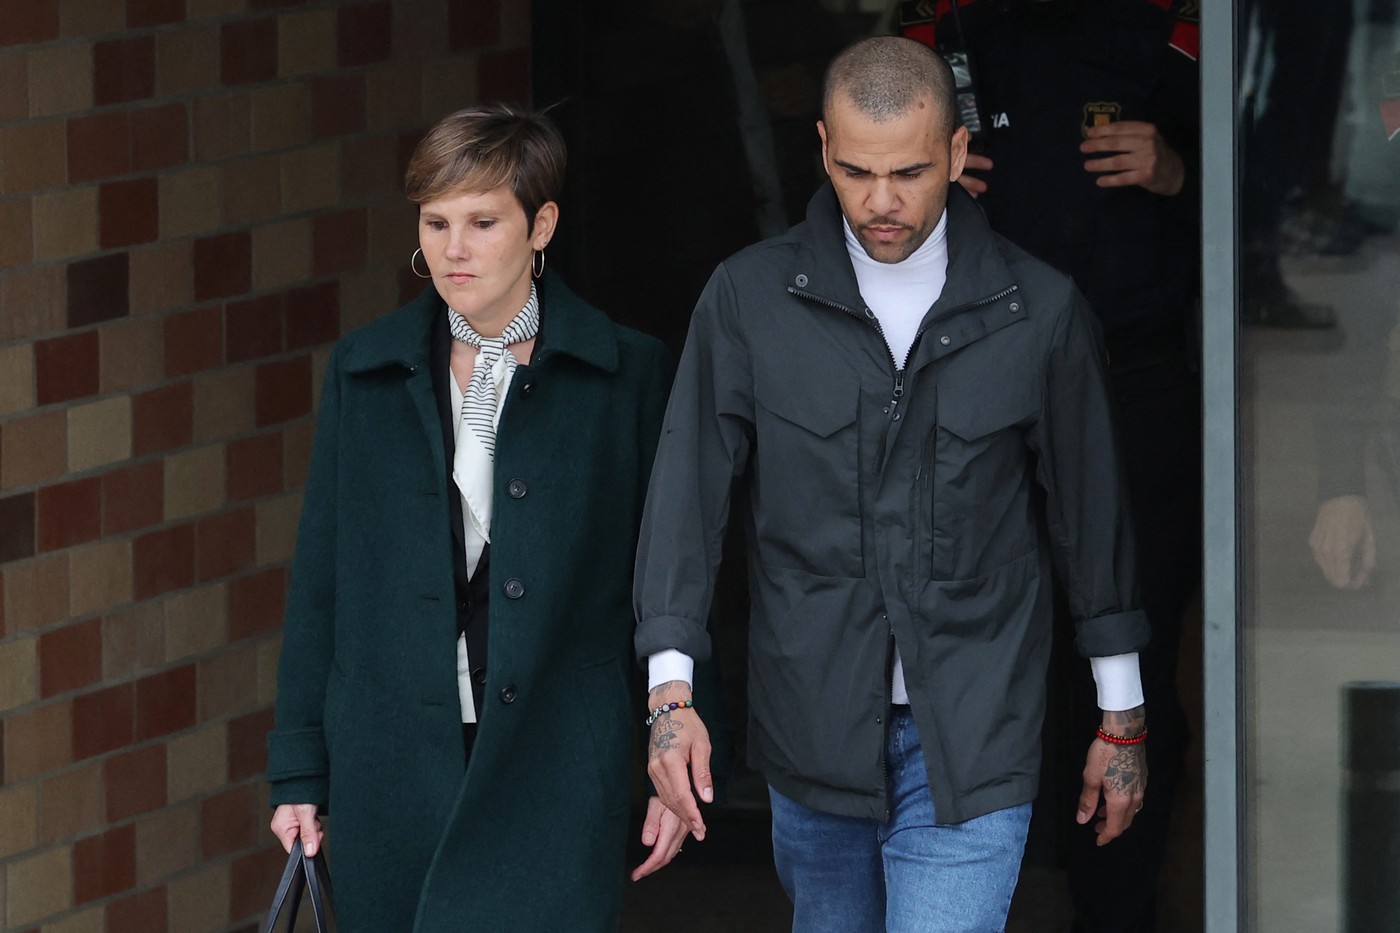 Convicted rapist and former Brazil international football player Dani Alves (R) leaves on provisional release, flanked by his lawyers Ines Guardiola at Brians 2 prison in Barcelona on March 25, 2024. Convicted rapist and former Brazil international Dani Alves left a jail in Barcelona on March 25, 2024 after posting the one-million-euro bail set by a Barcelona court to ensure his release pending appeal. Ex-Brazil star has been sentenced to 4.5 years in jail for rape on February 22, 2024.,Image: 859473923, License: Rights-managed, Restrictions: , Model Release: no